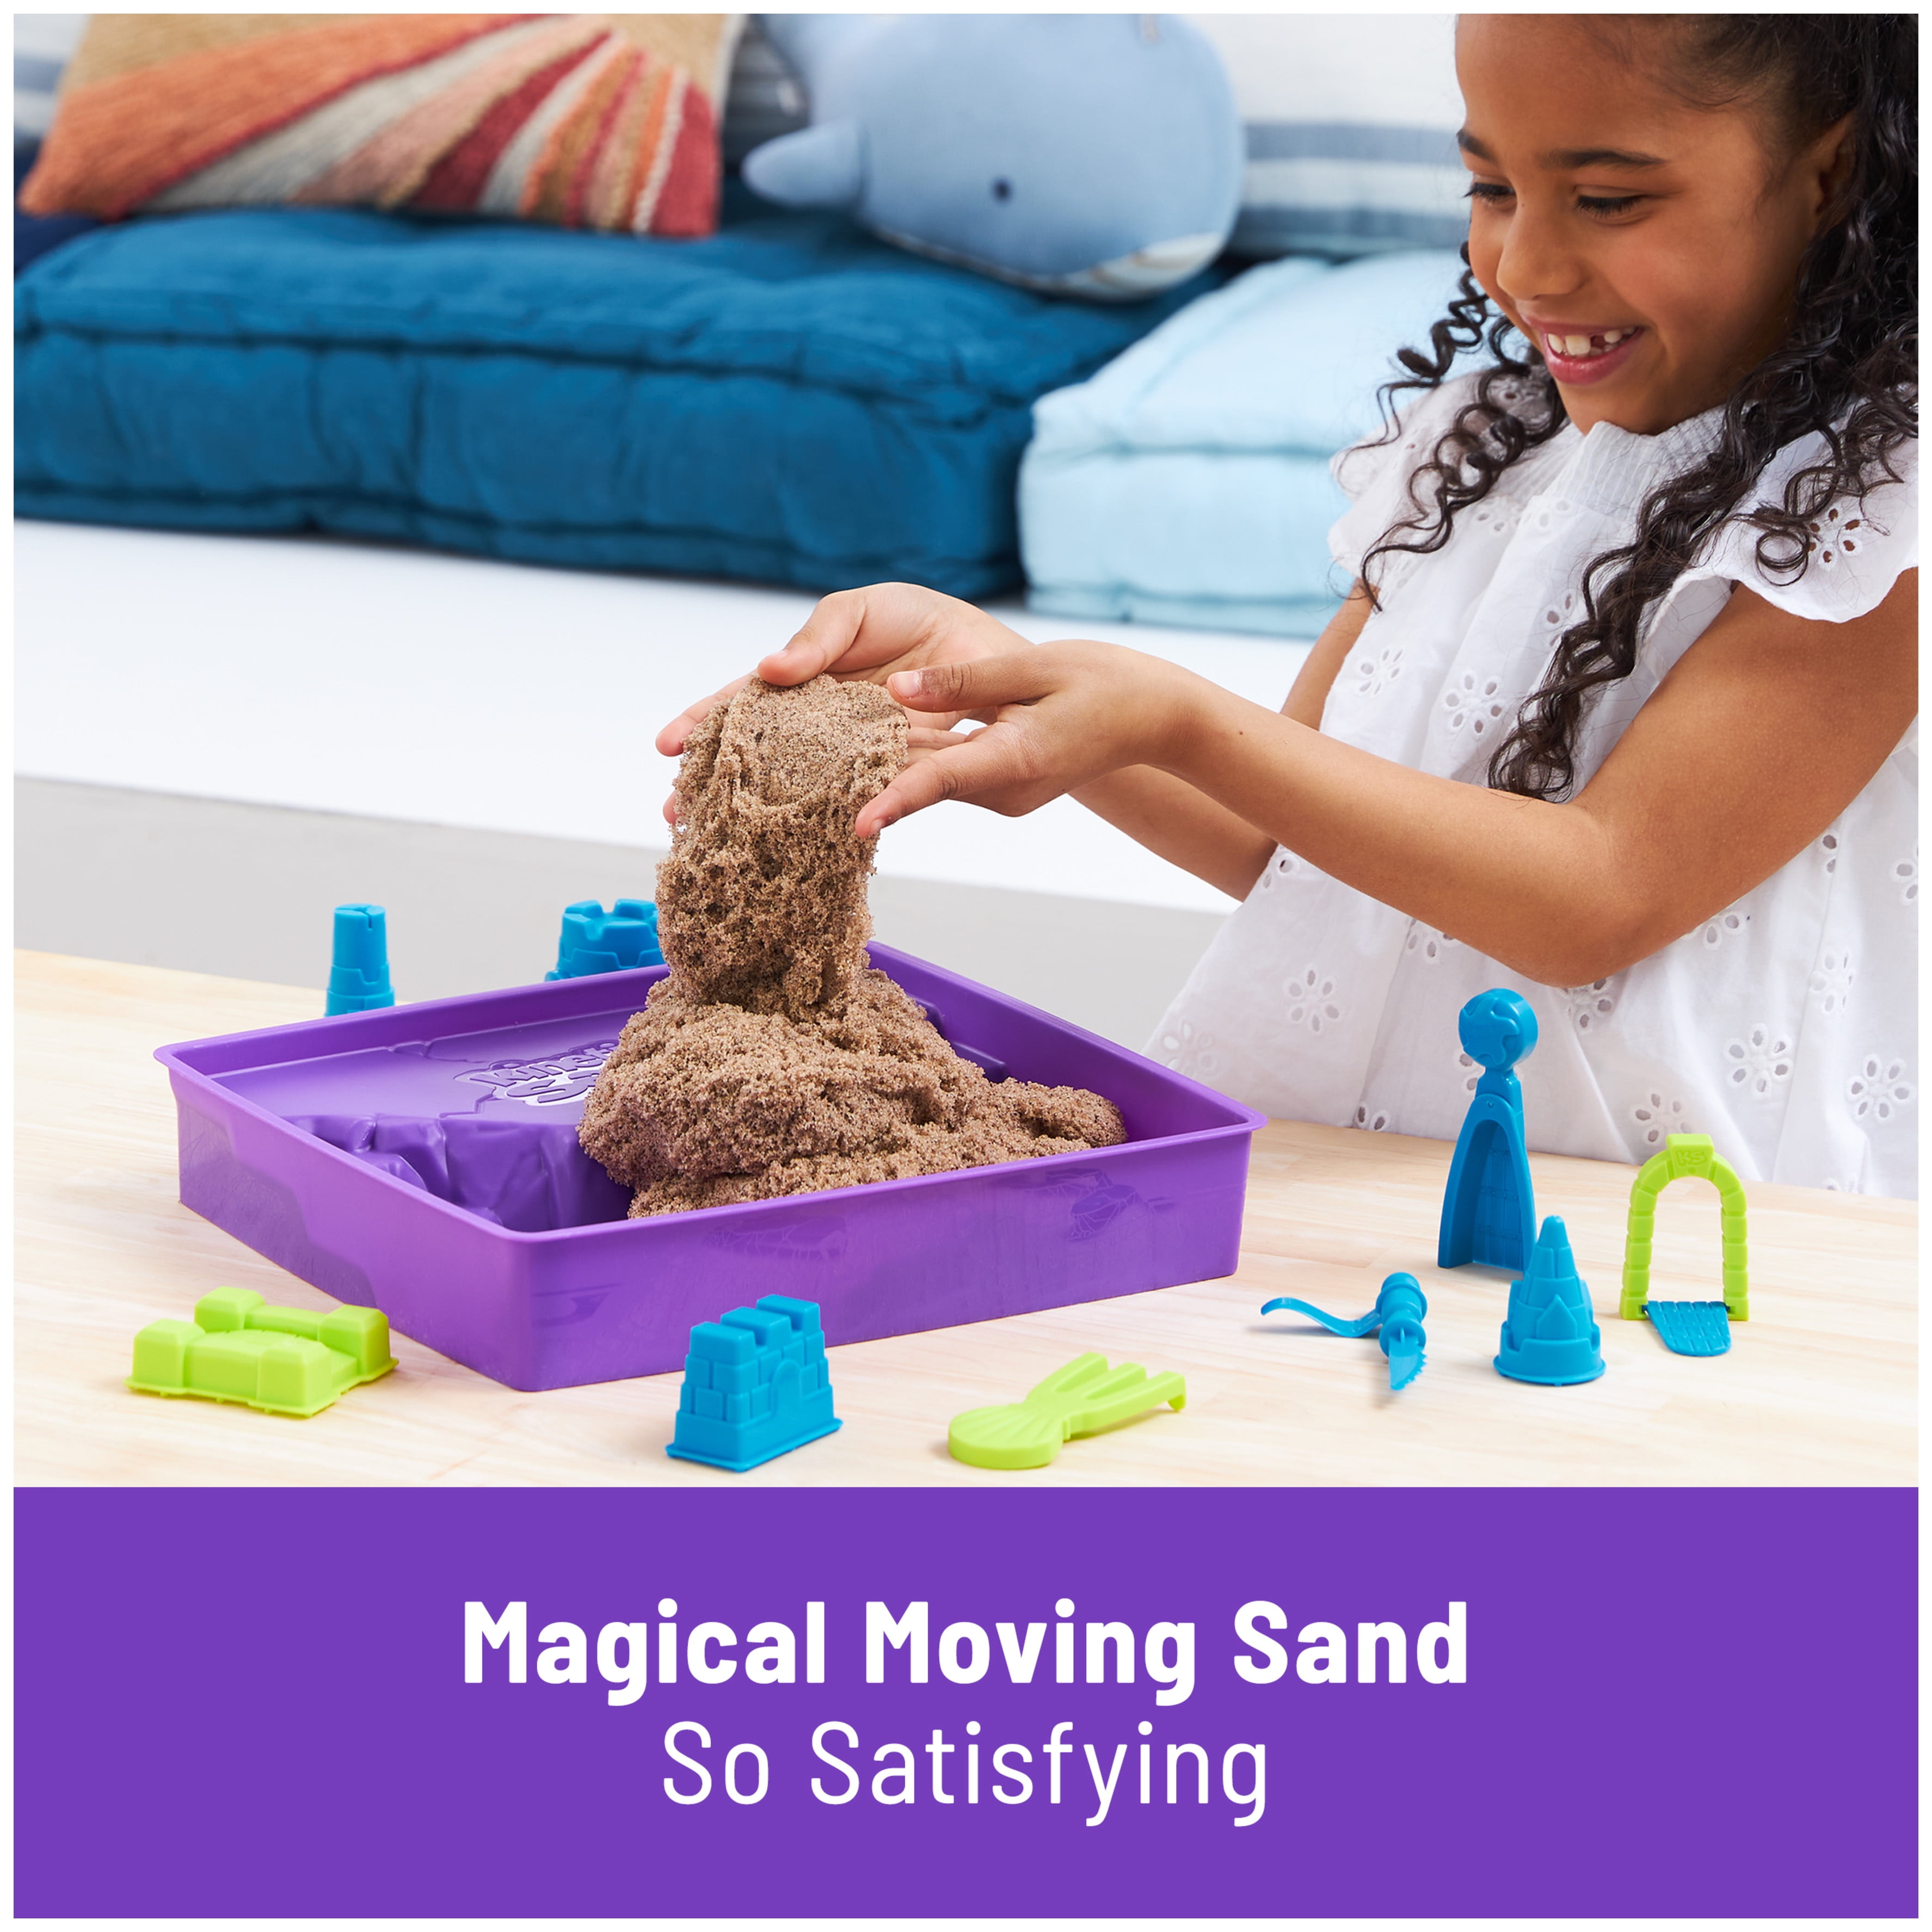 Kinetic Sand, Beach Day Fun Playset with Castle Molds, Tools and 12 oz. of  All-Natural Kinetic Beach Sand, Play Sand Sensory Toys for Kids Ages 3 and